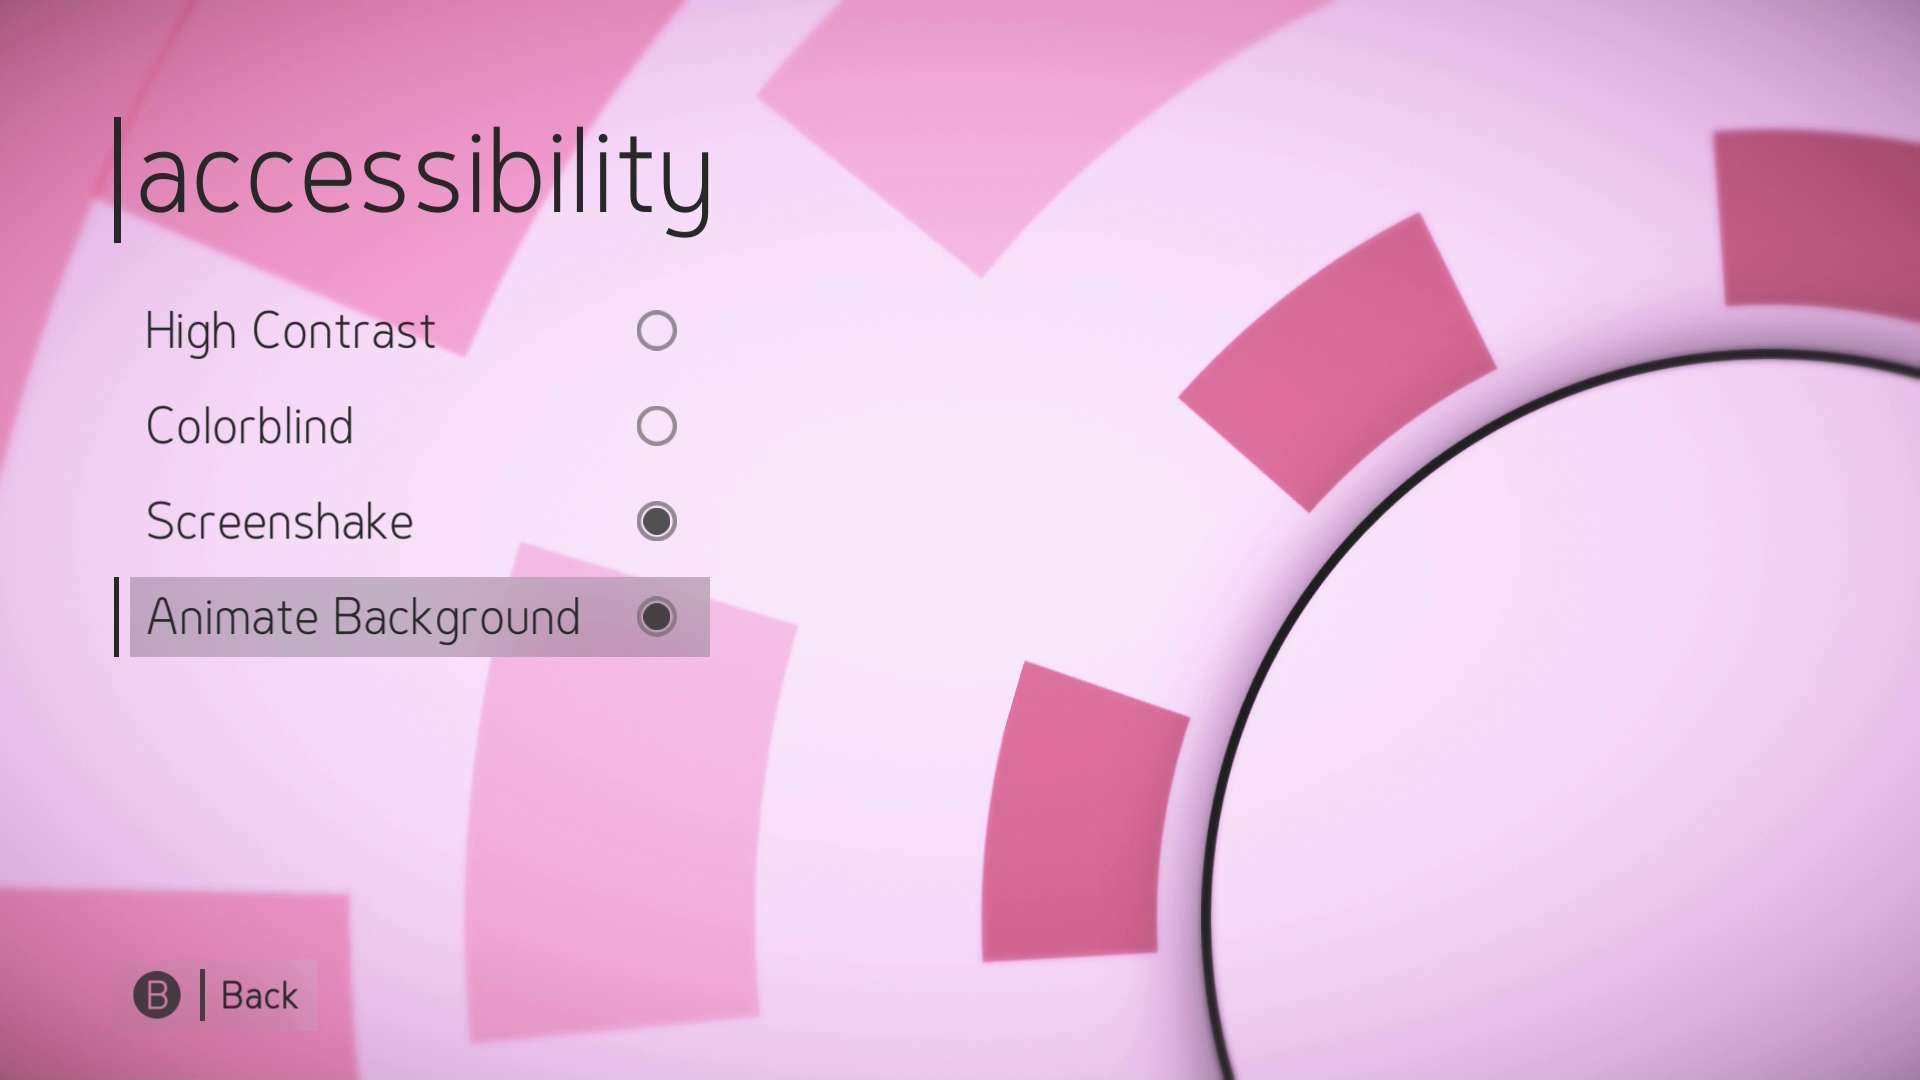 A screenshot from HyperDot with the "Accessibility" menu displayed. A option labeled "Animate Background" is selected.